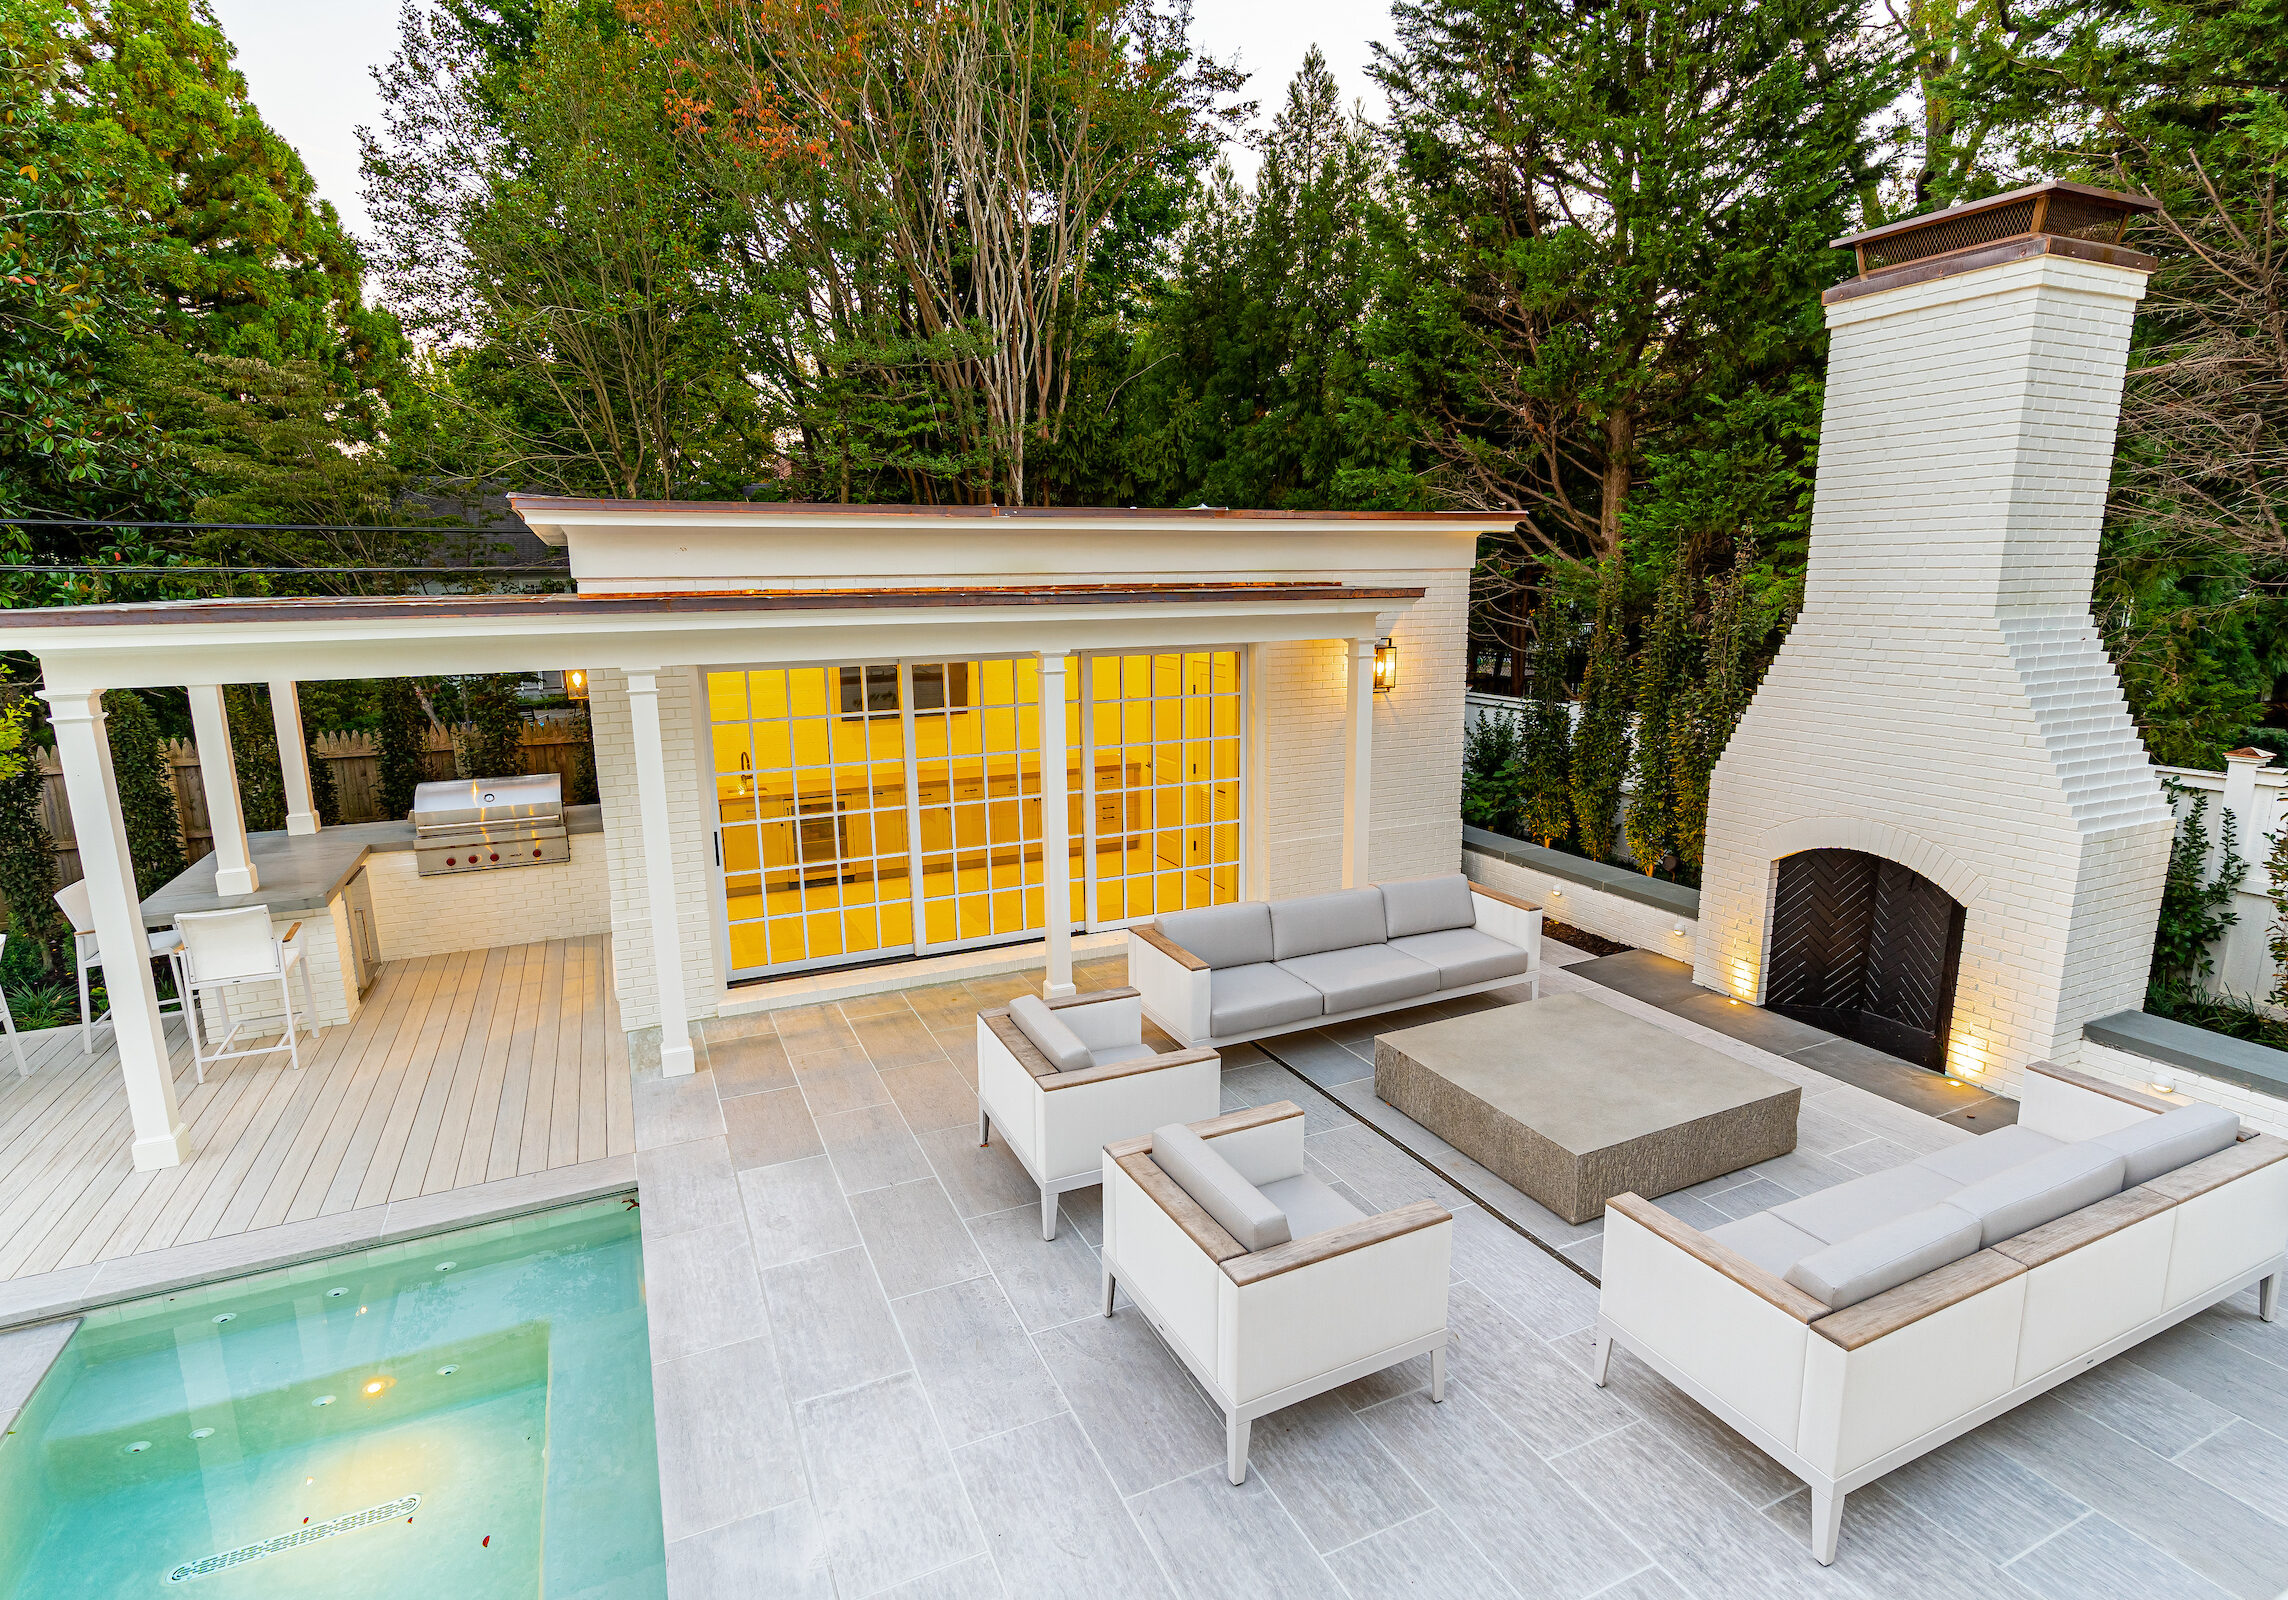 Luxurious Outdoor Space with Seating Area, Fireplace, Outdoor Kitchen, and Pool